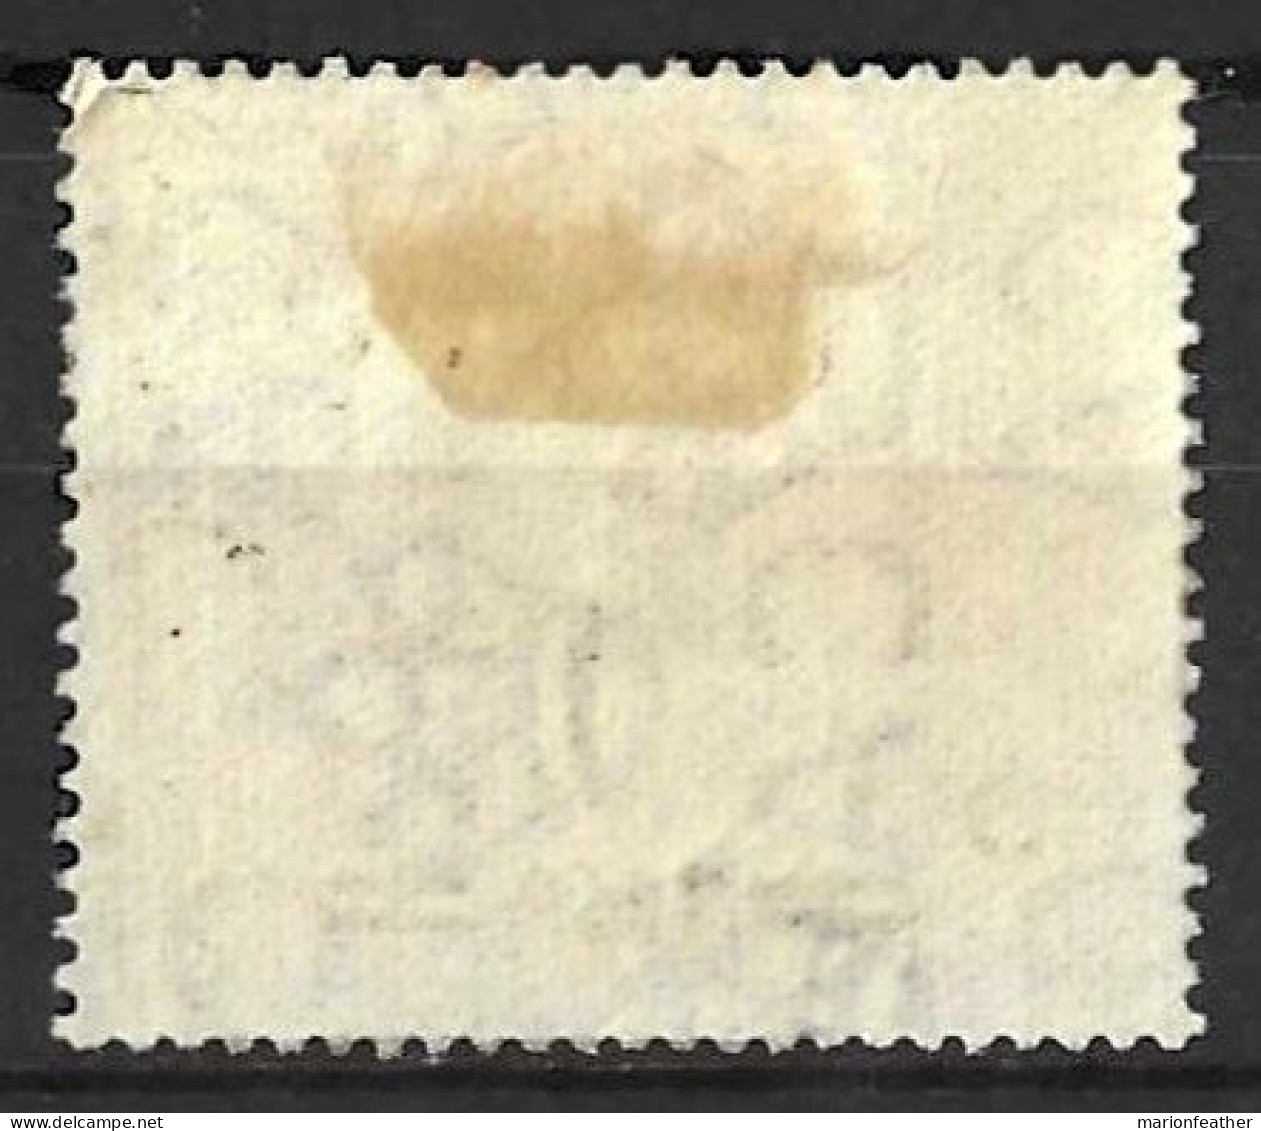 DOMINICA......KING GEORGE V...(1910-36..)....." 1919.".....FLAW.......SG59a....SHORT FRACTION BAR..... CDS......VFU... - Dominica (...-1978)